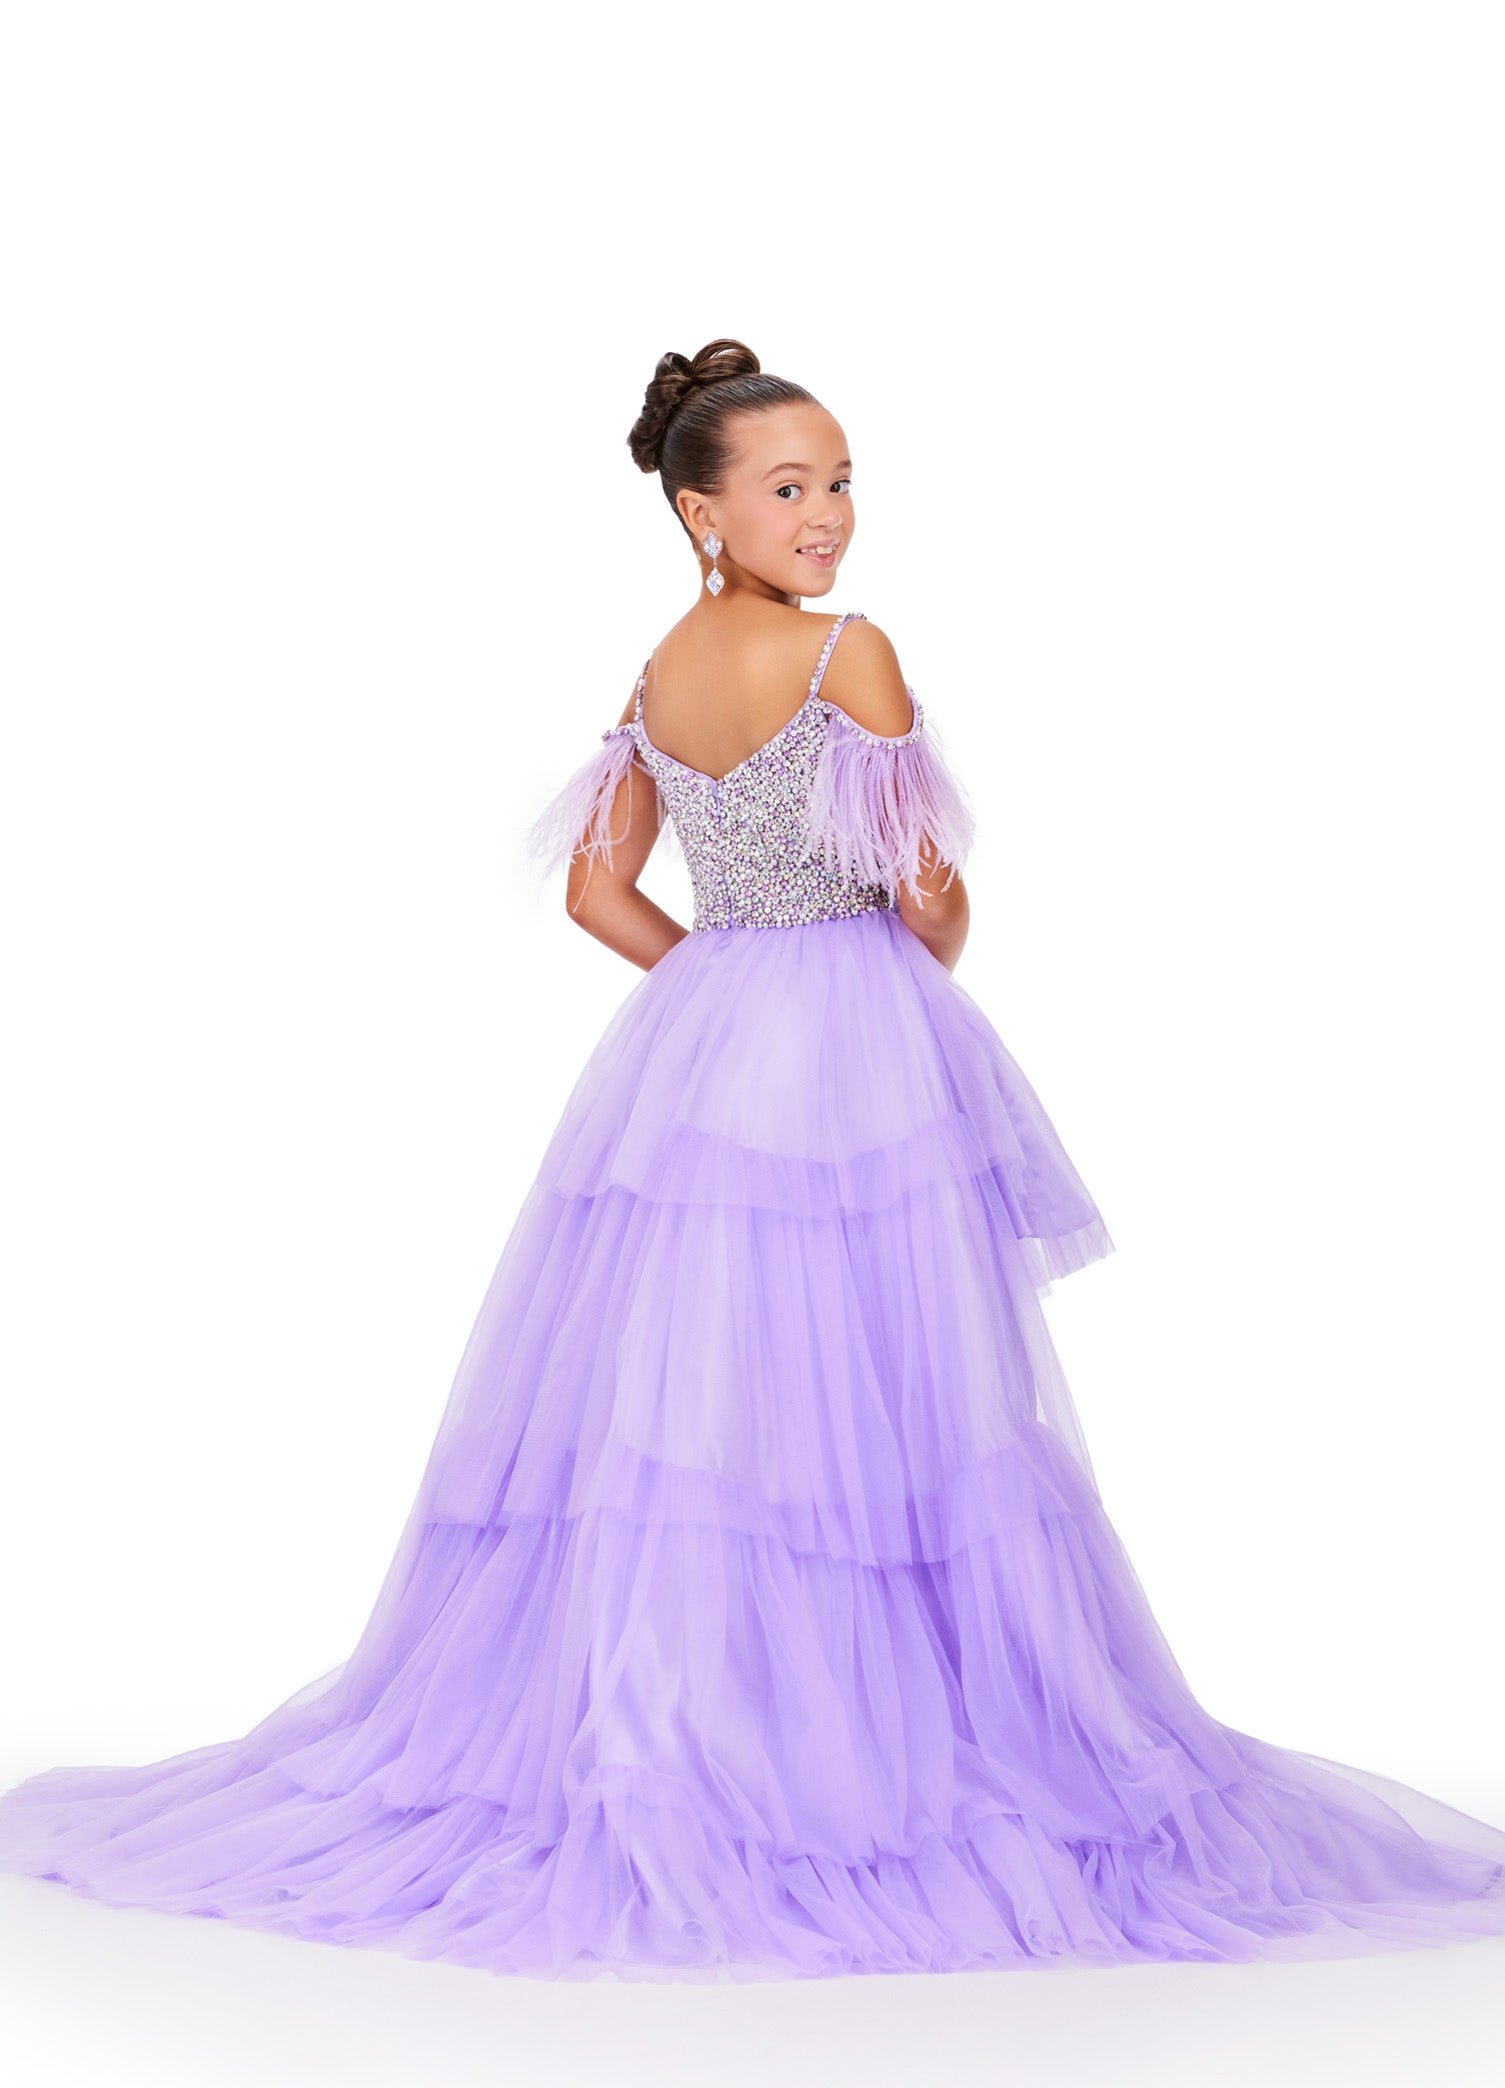 This Ashley Lauren Kids 8259 dress features layered tulle, a high low style, and an off the shoulder design with delicate feather accents. Perfect for pageants, your little girl will look stunning and feel confident in this unique and elegant dress. This fun & flirty kids tulle tiered high low features off the shoulder feather straps and a crystal encrusted bodice